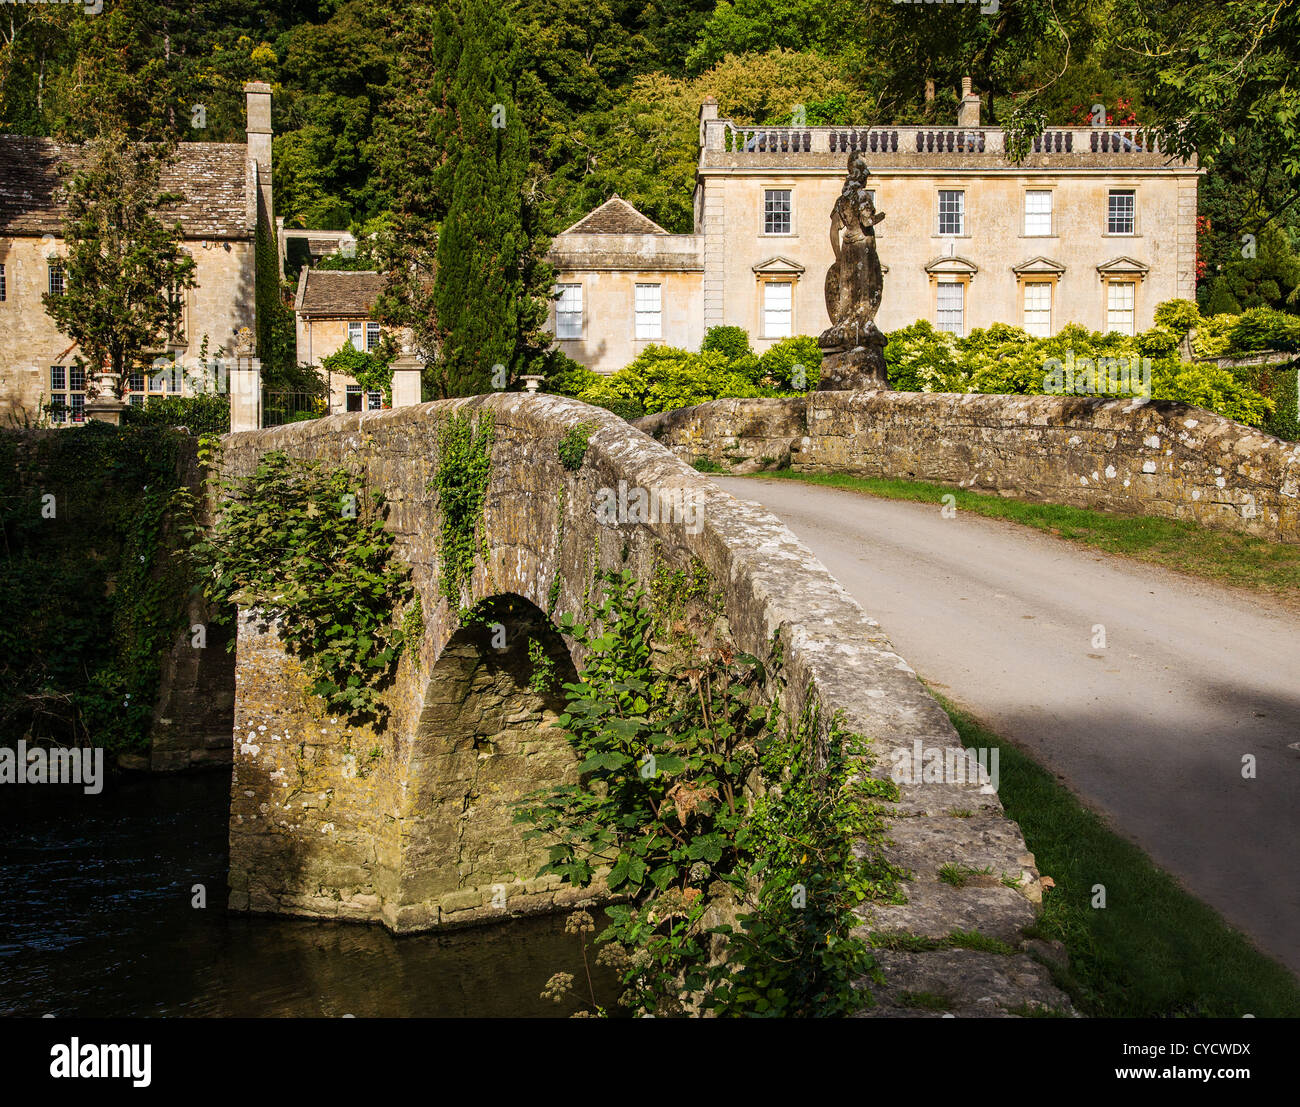 Bridge with statue of Britannia over the River Frome at Iford Manor in Wiltshire UK Stock Photo